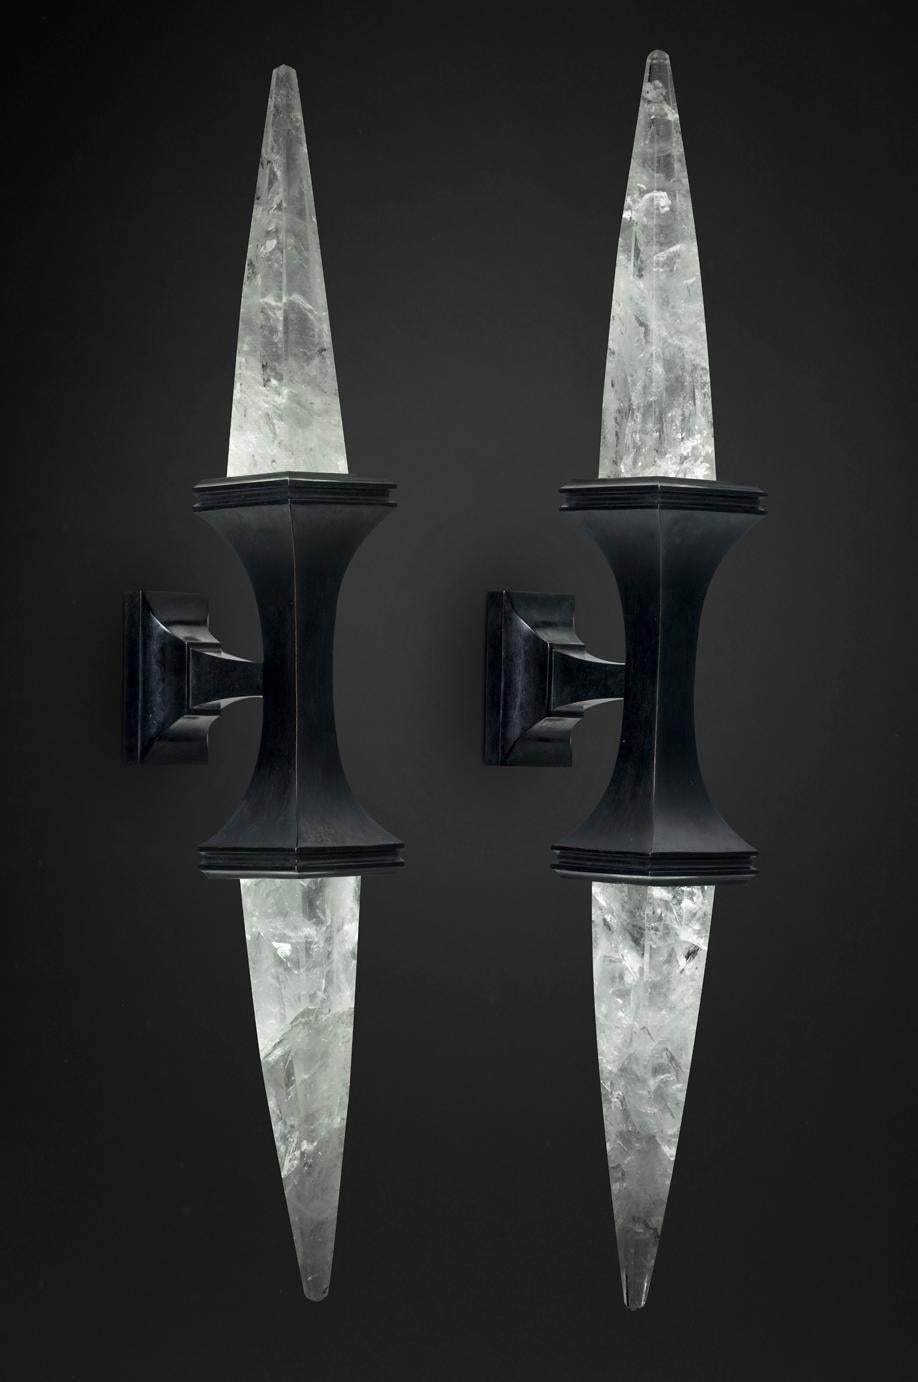 Rock crystal quartz wall light I, black edition.
These wall sconces are handmade in bronze in Paris.
Each workers who made this wall sconce belongs to a corporation and worked also for the most famous French companies (Haute Couture and